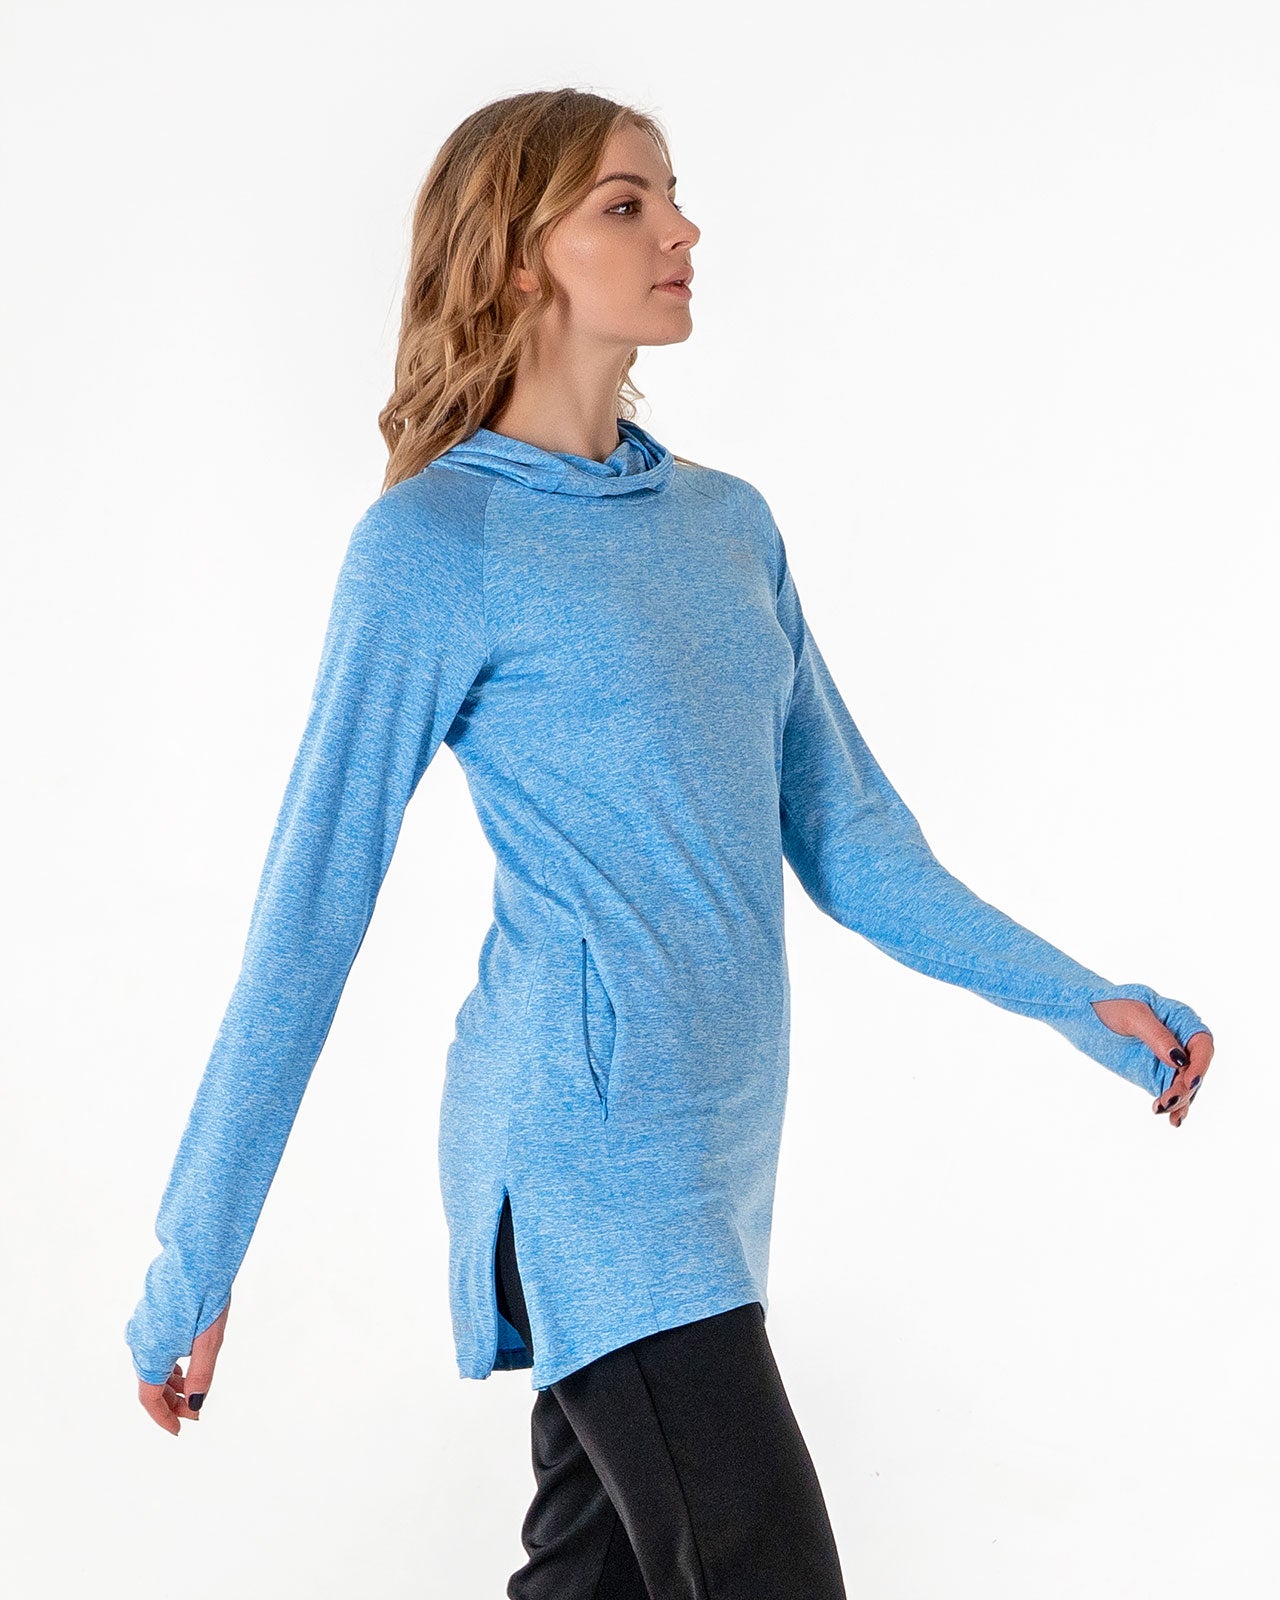 Halo Running Hoodie in heathered blue by Veil Garments. Modest activewear collection.